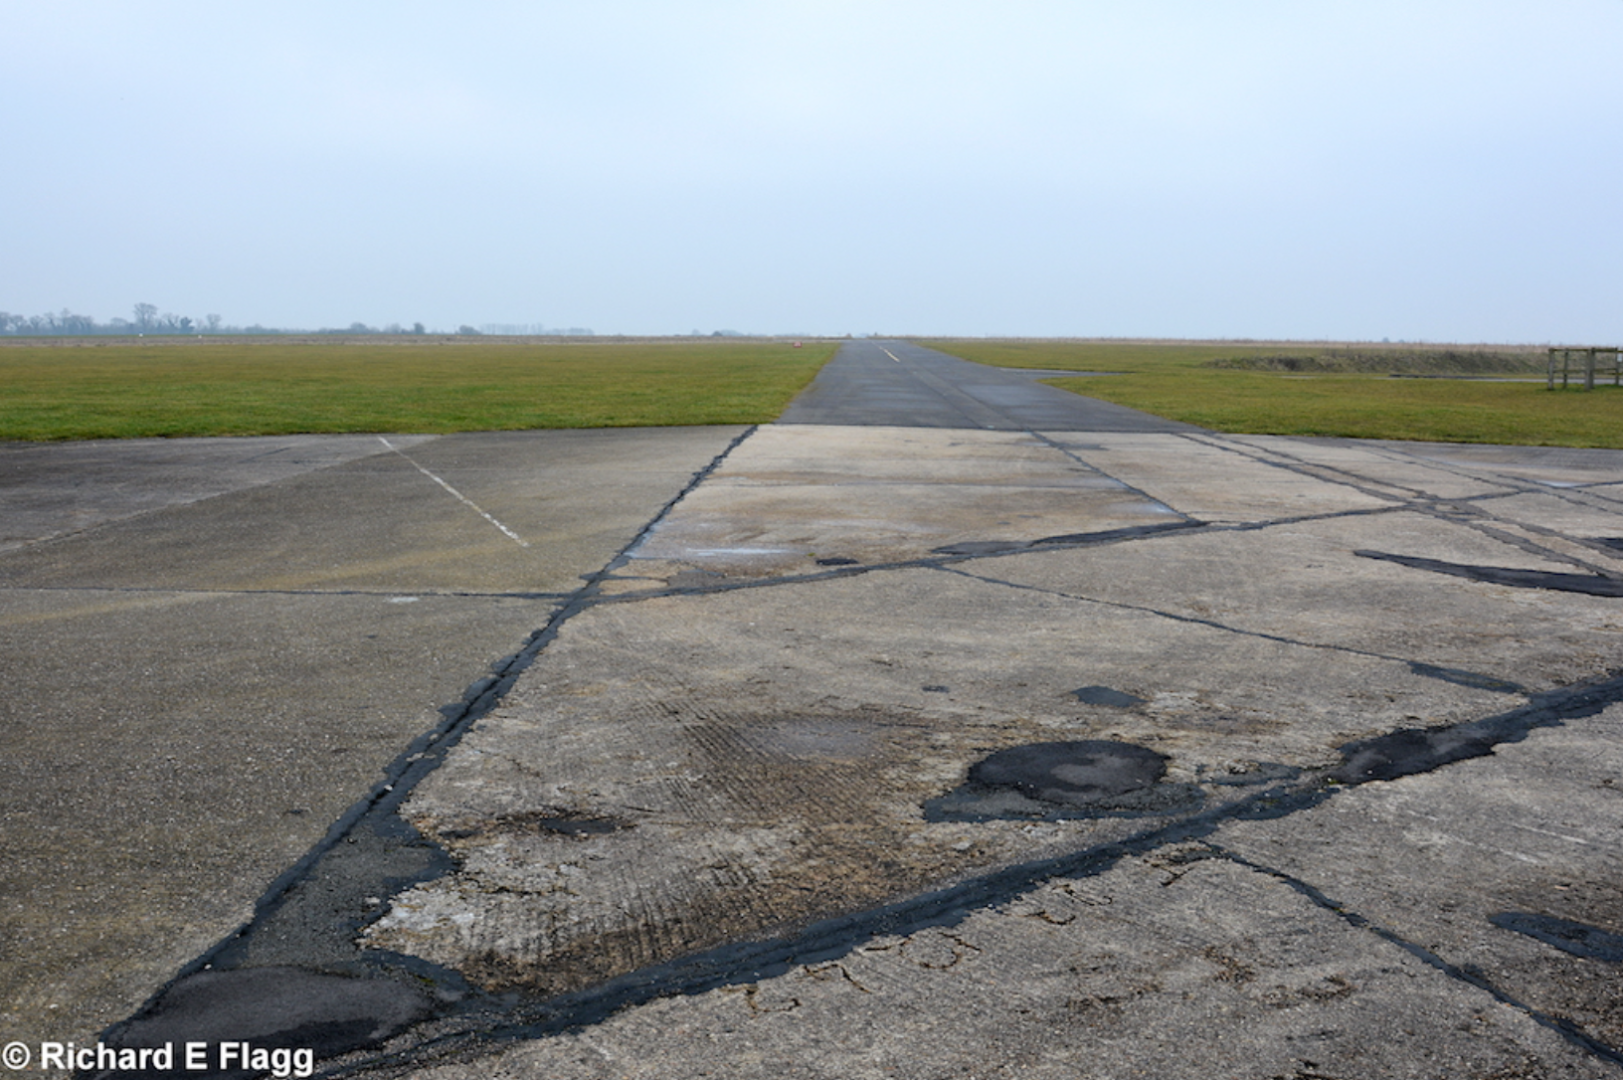 013Looking north east from the runway 03 threshold - 15 February 2015.png